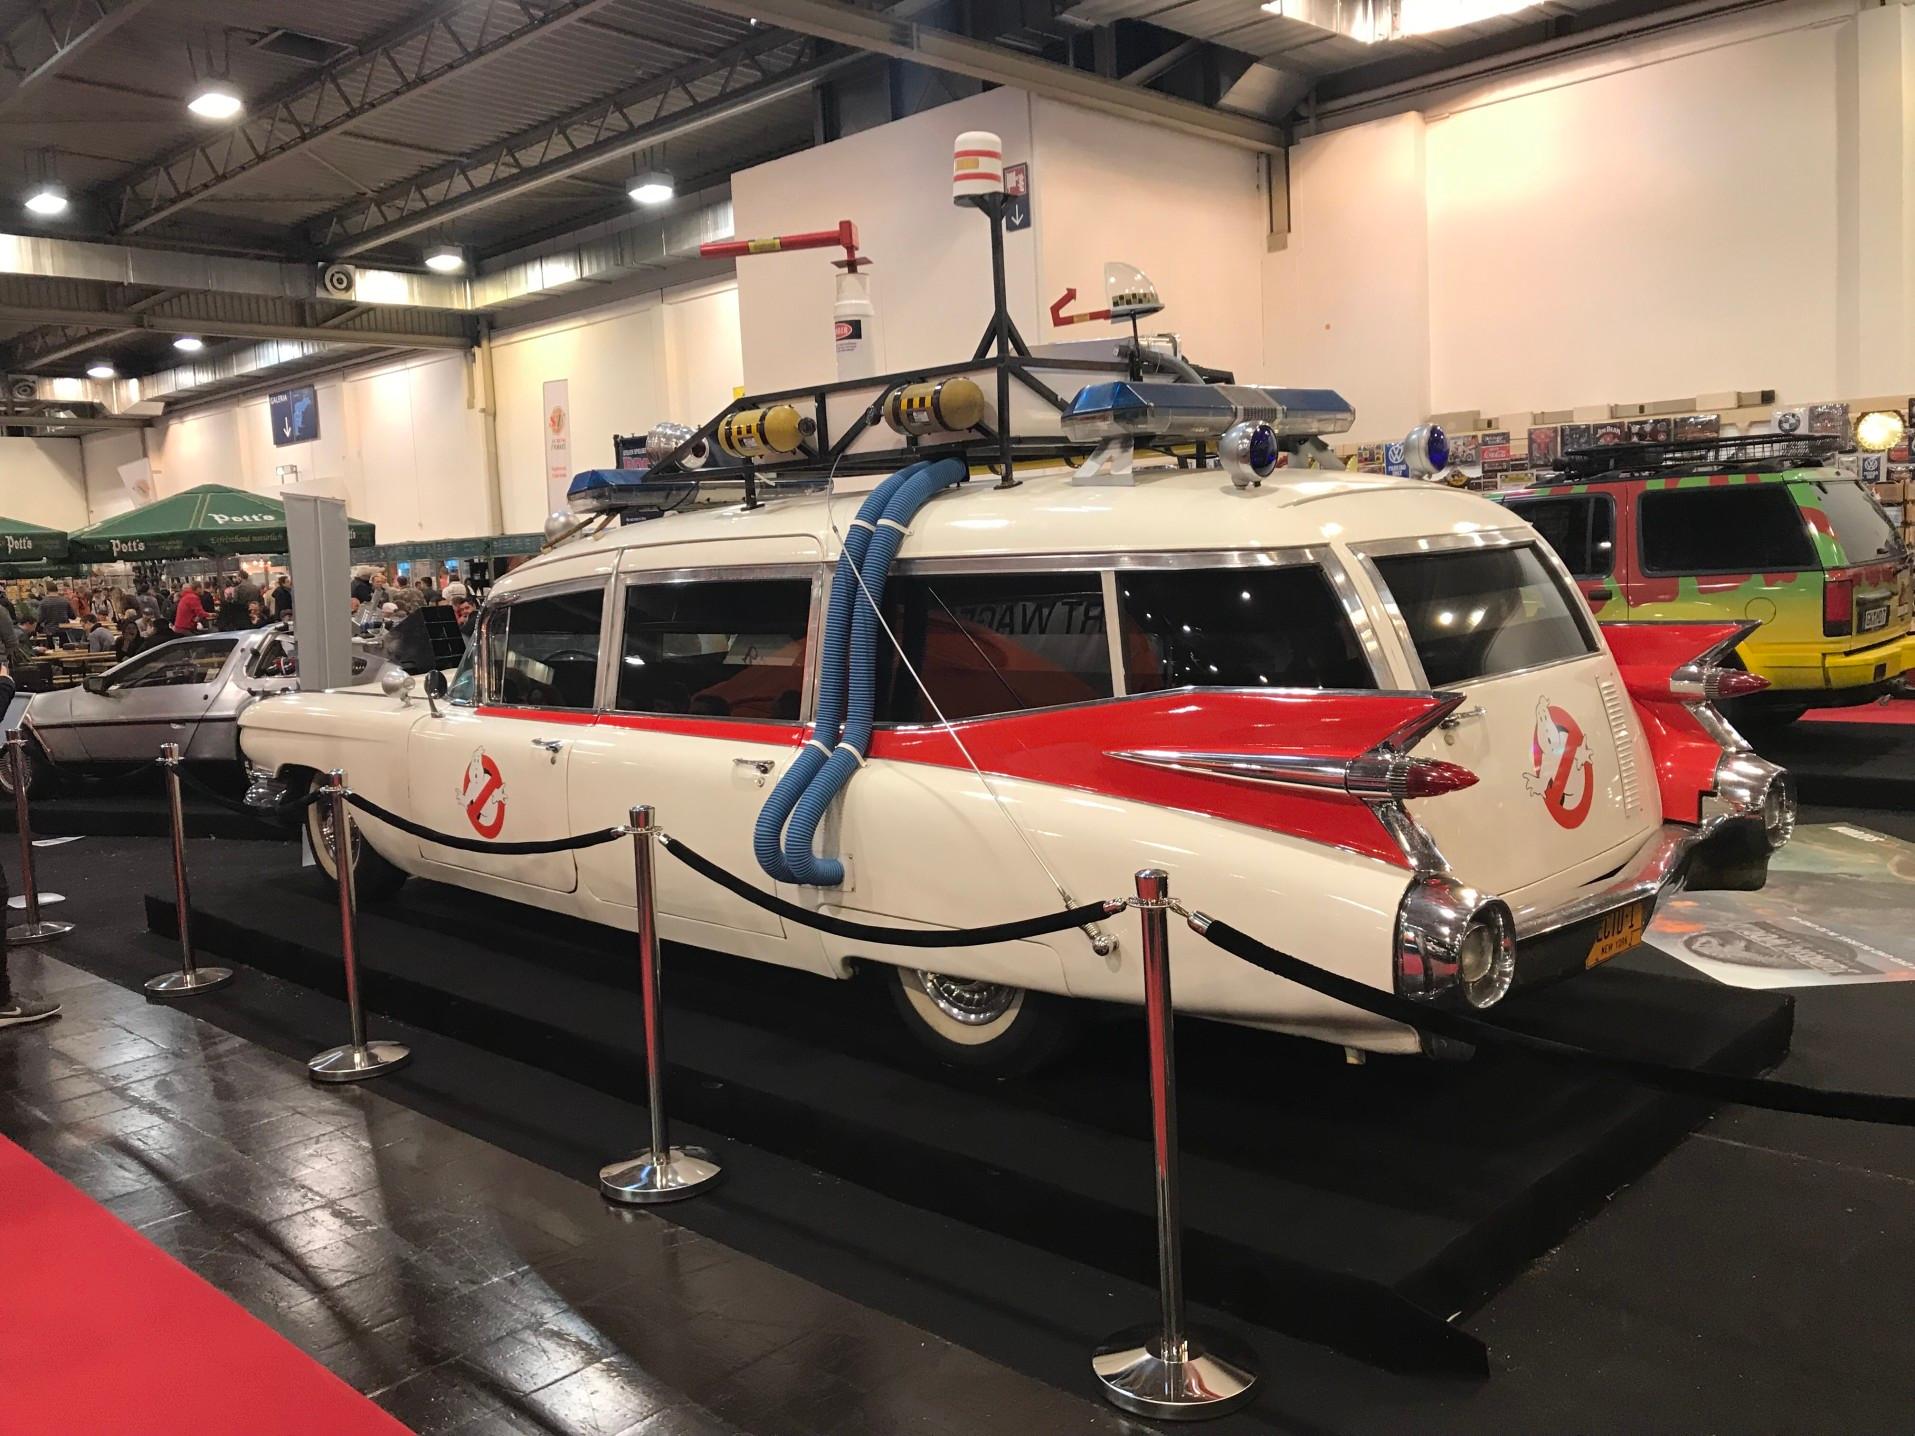 All the anticipation waiting for the new Ghostbusters movie got us wondering, what exactly happened to the iconic Ghostbusters Ecto-1 car?